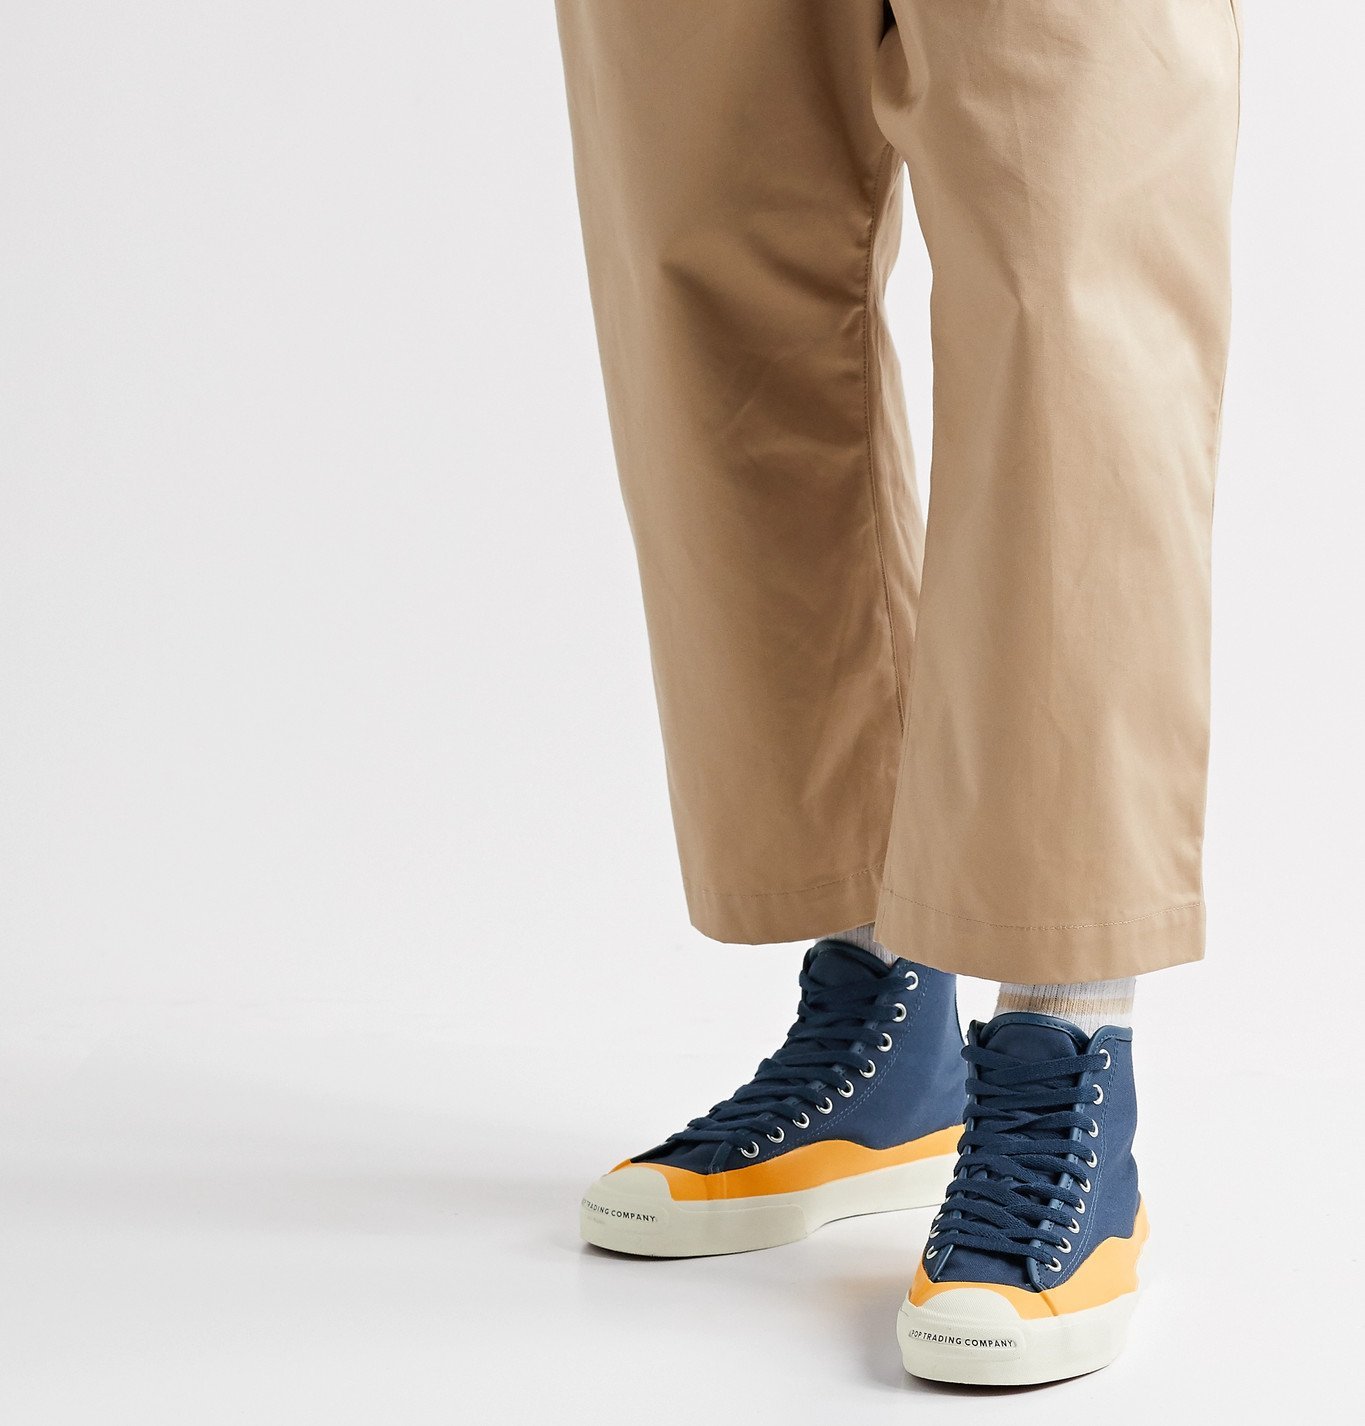 Converse - Pop Trading Company Jack Purcell Rubber-Trimmed Canvas High-Top  Sneakers - Blue Converse